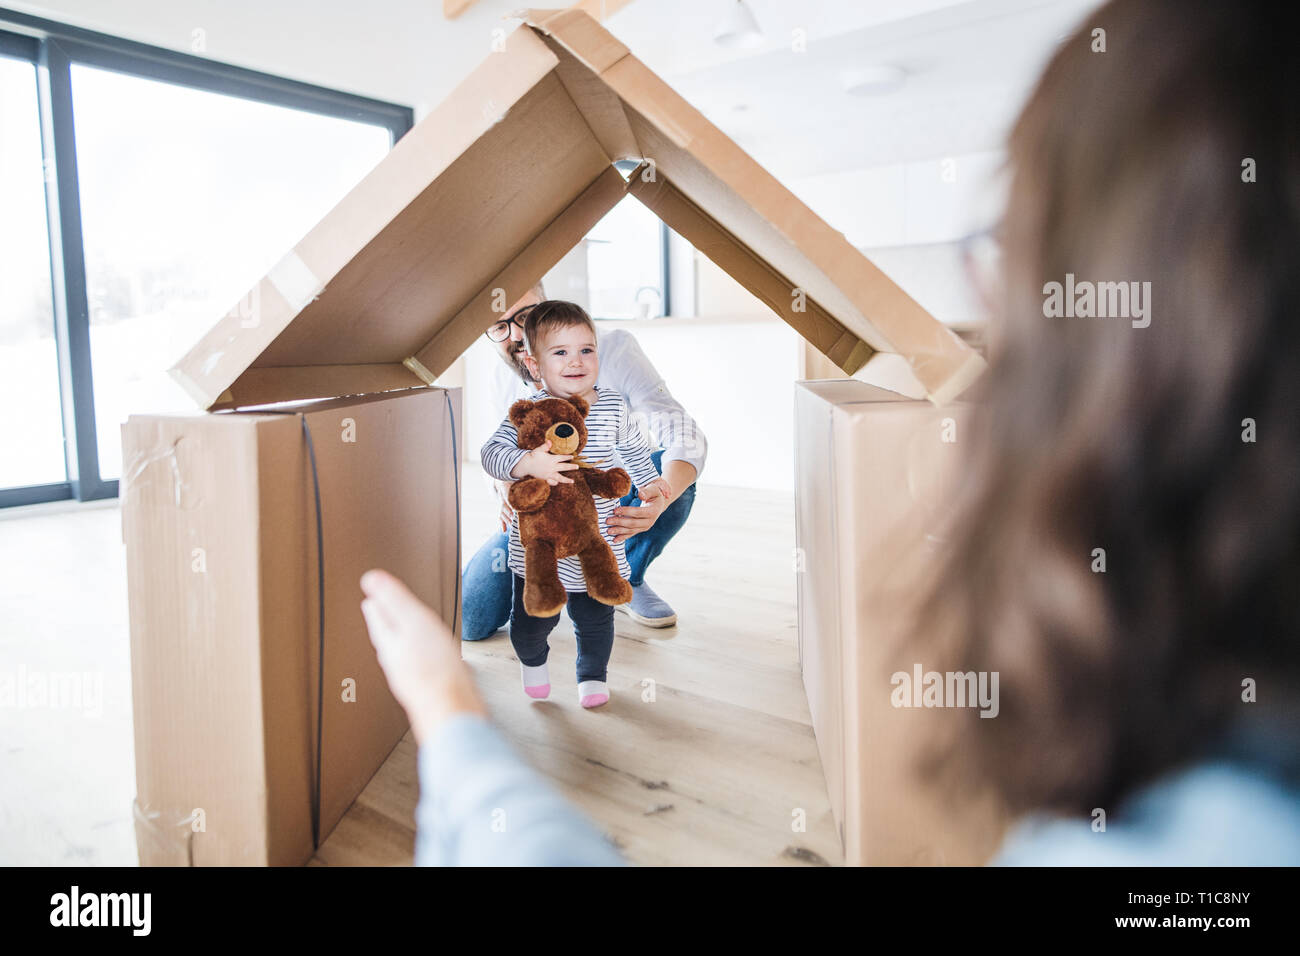 A young family with a toddler girl indoors, moving in new home concept. Stock Photo